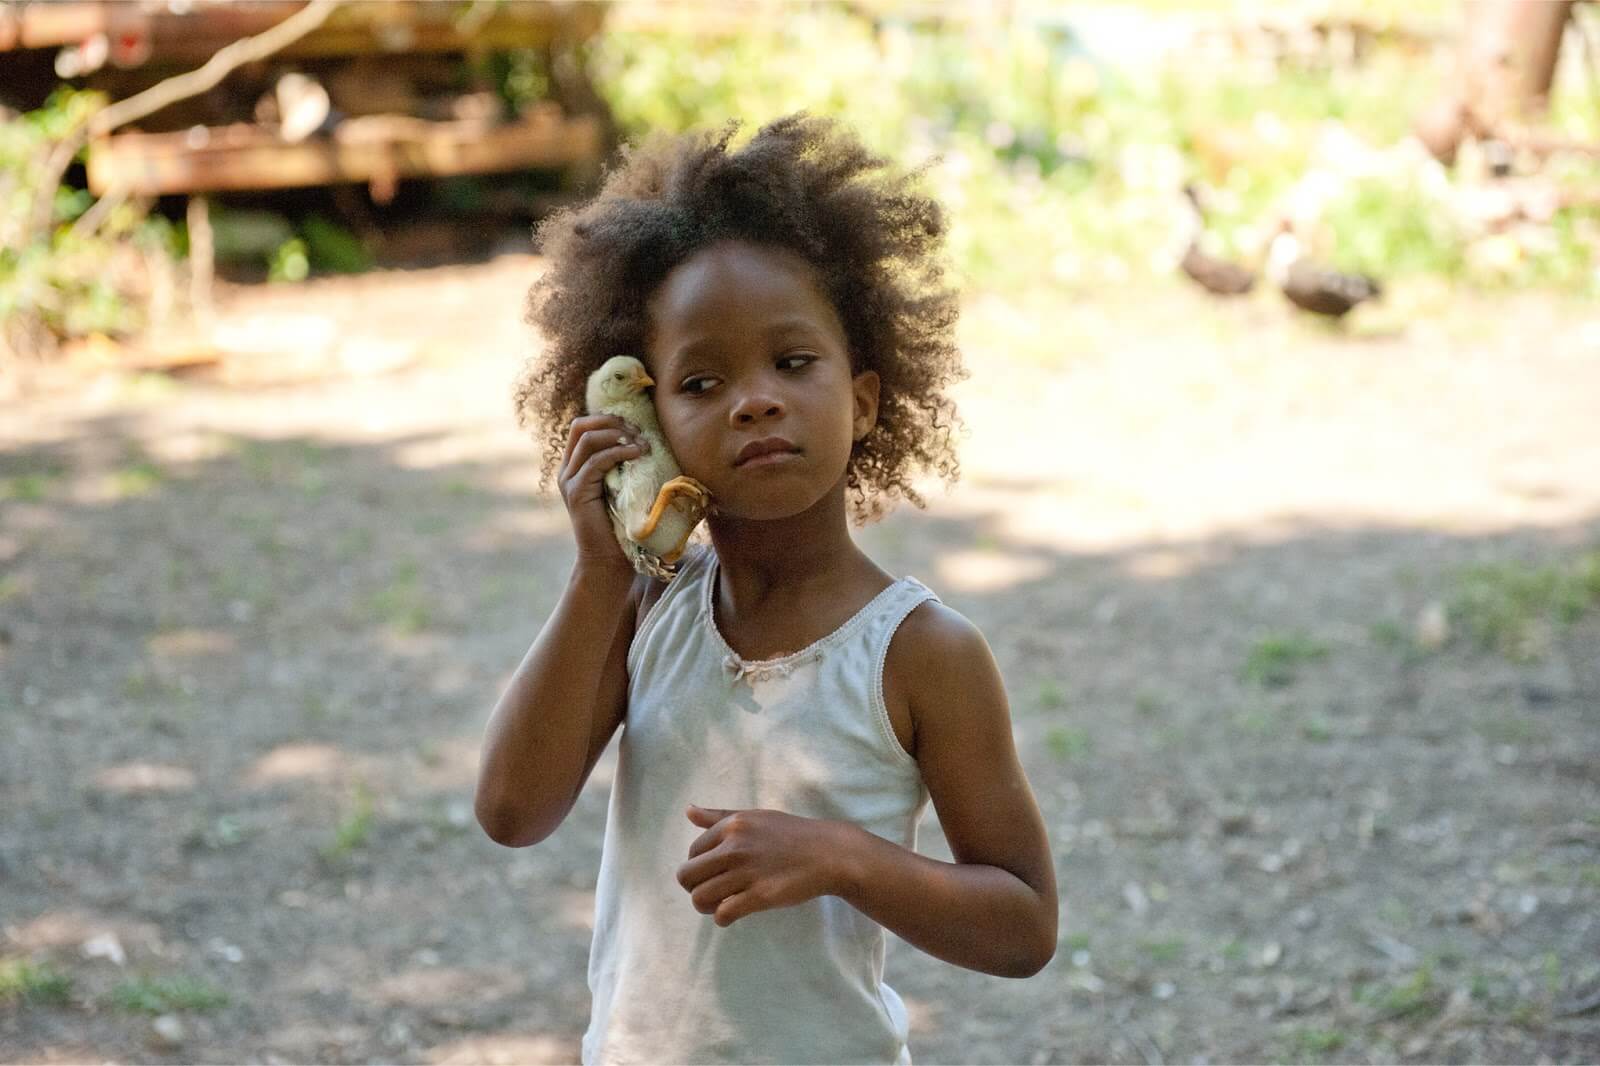 the_85th_Academy_Awards-Quvenzhane_Wallis-Beasts_of_the_Southern_Wild (2)